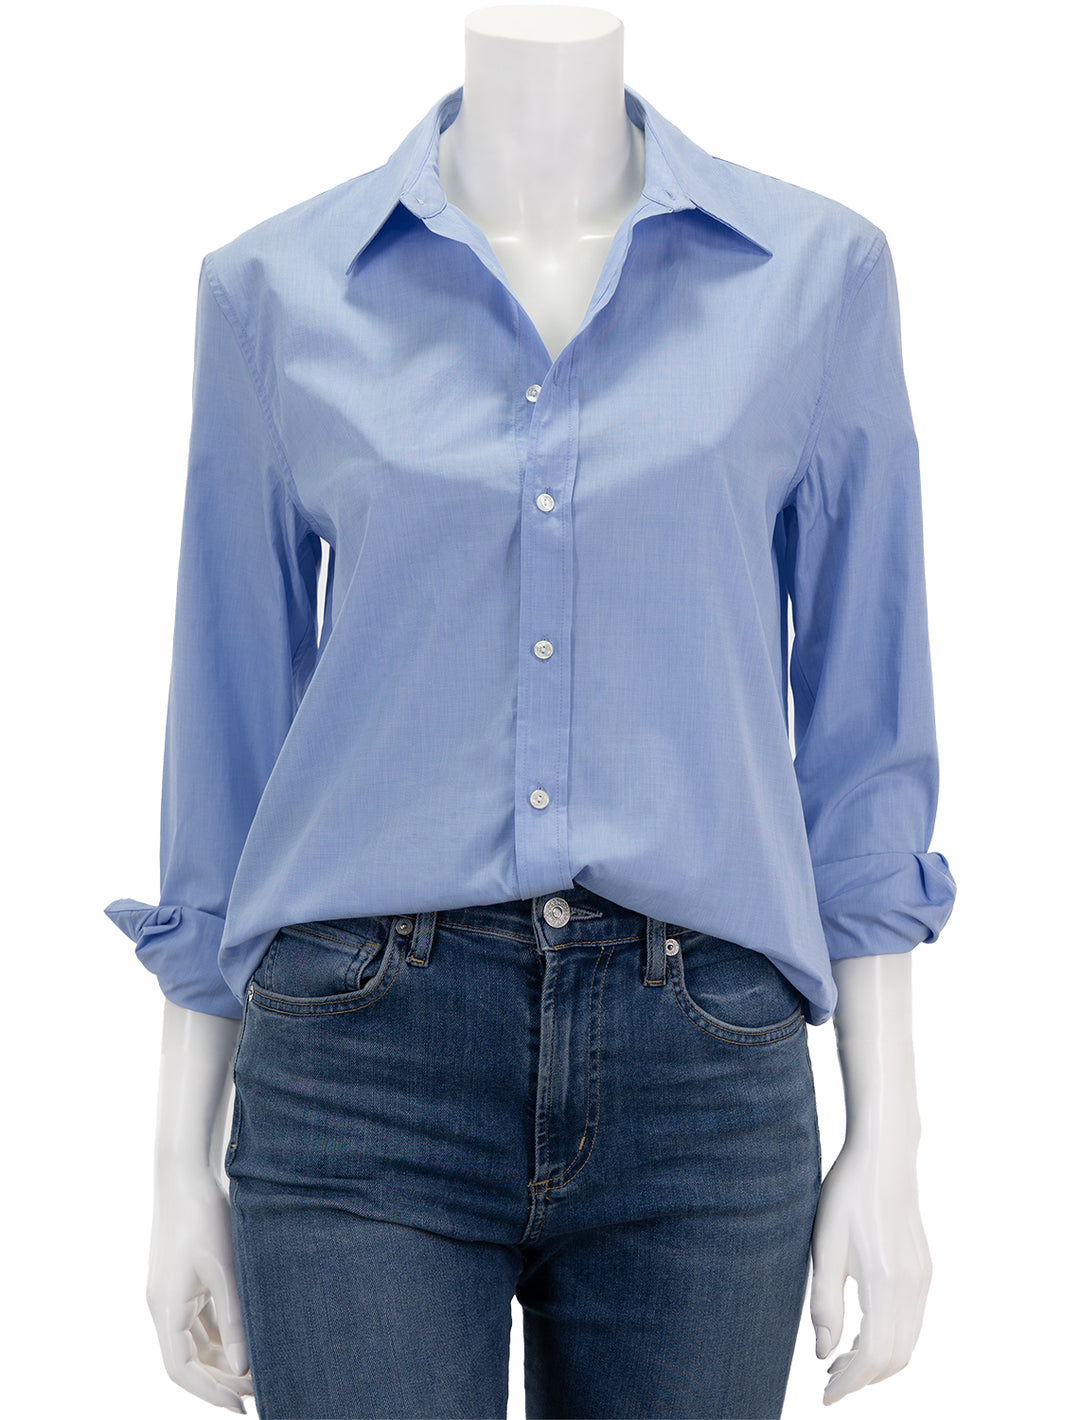 Front view of Nili Lotan's raphael classic shirt in light blue.